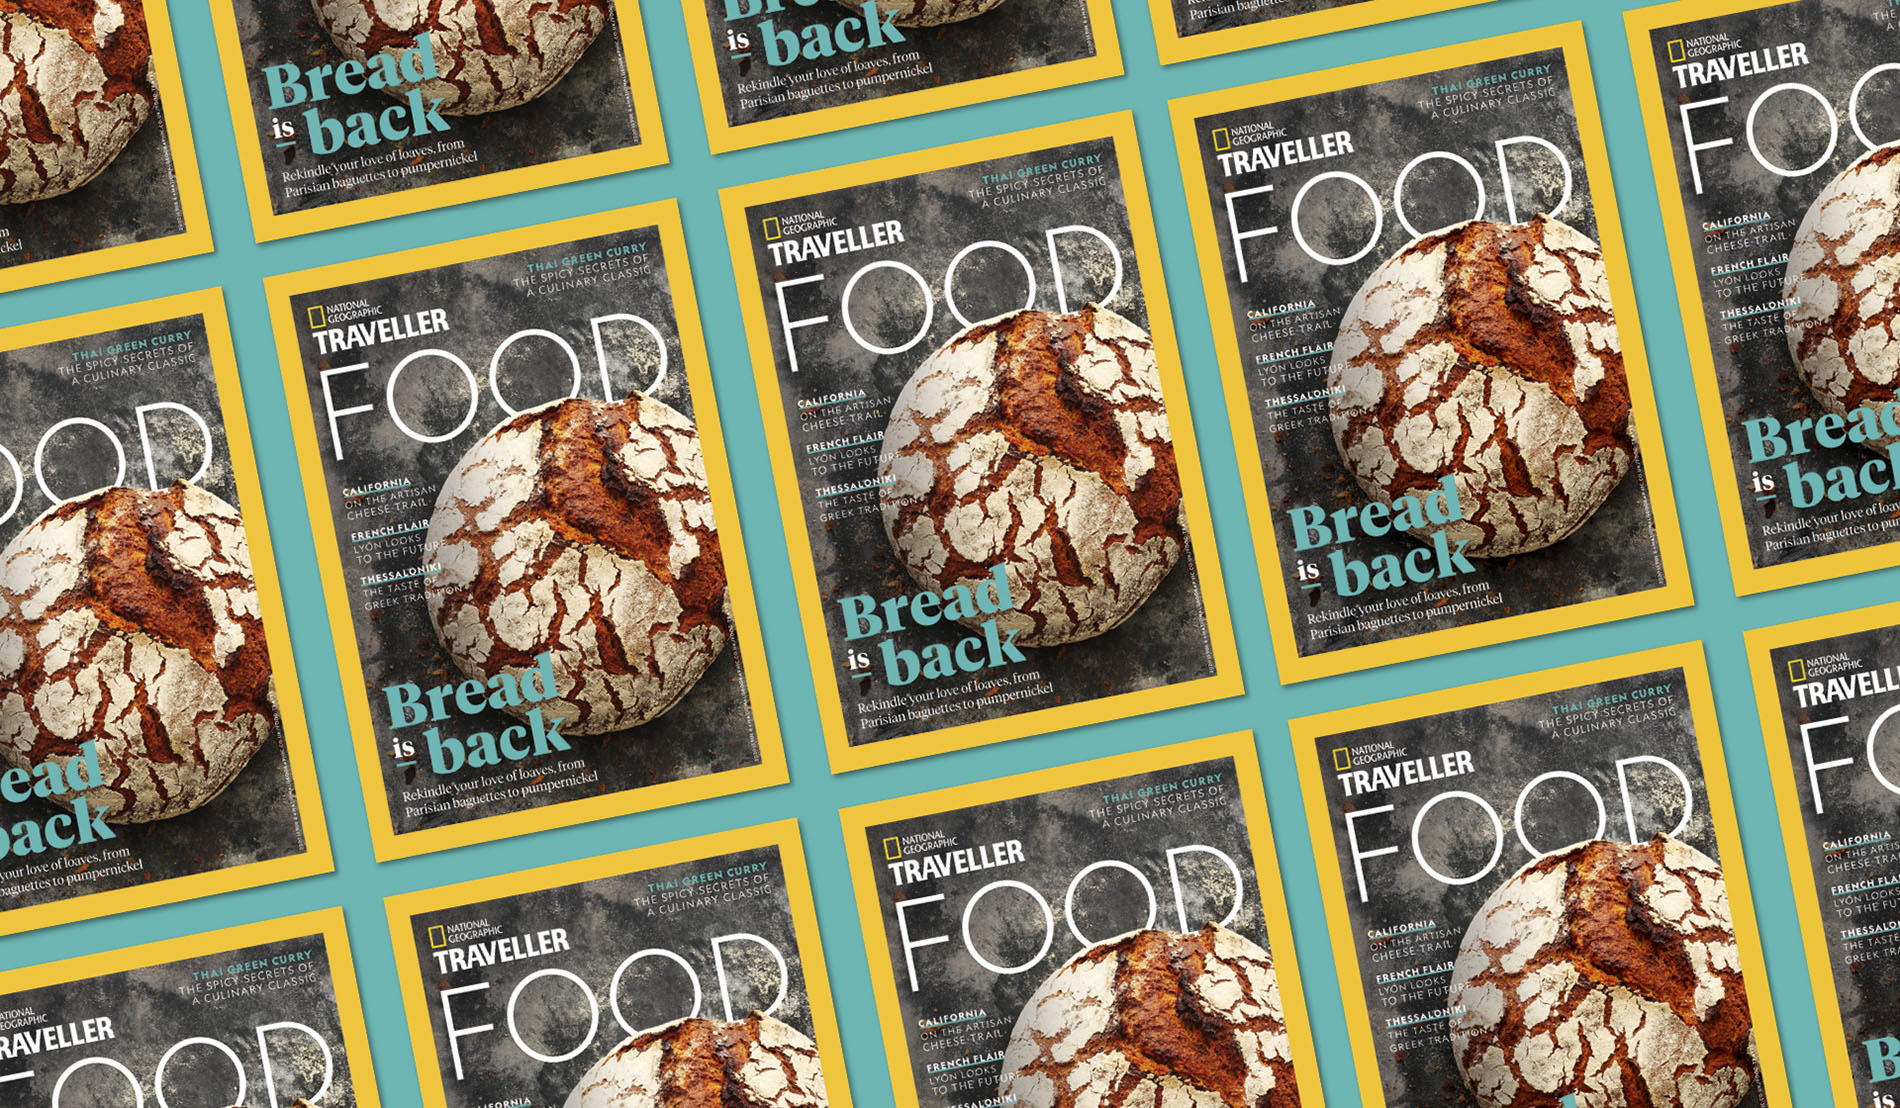 NGT Food issue 8